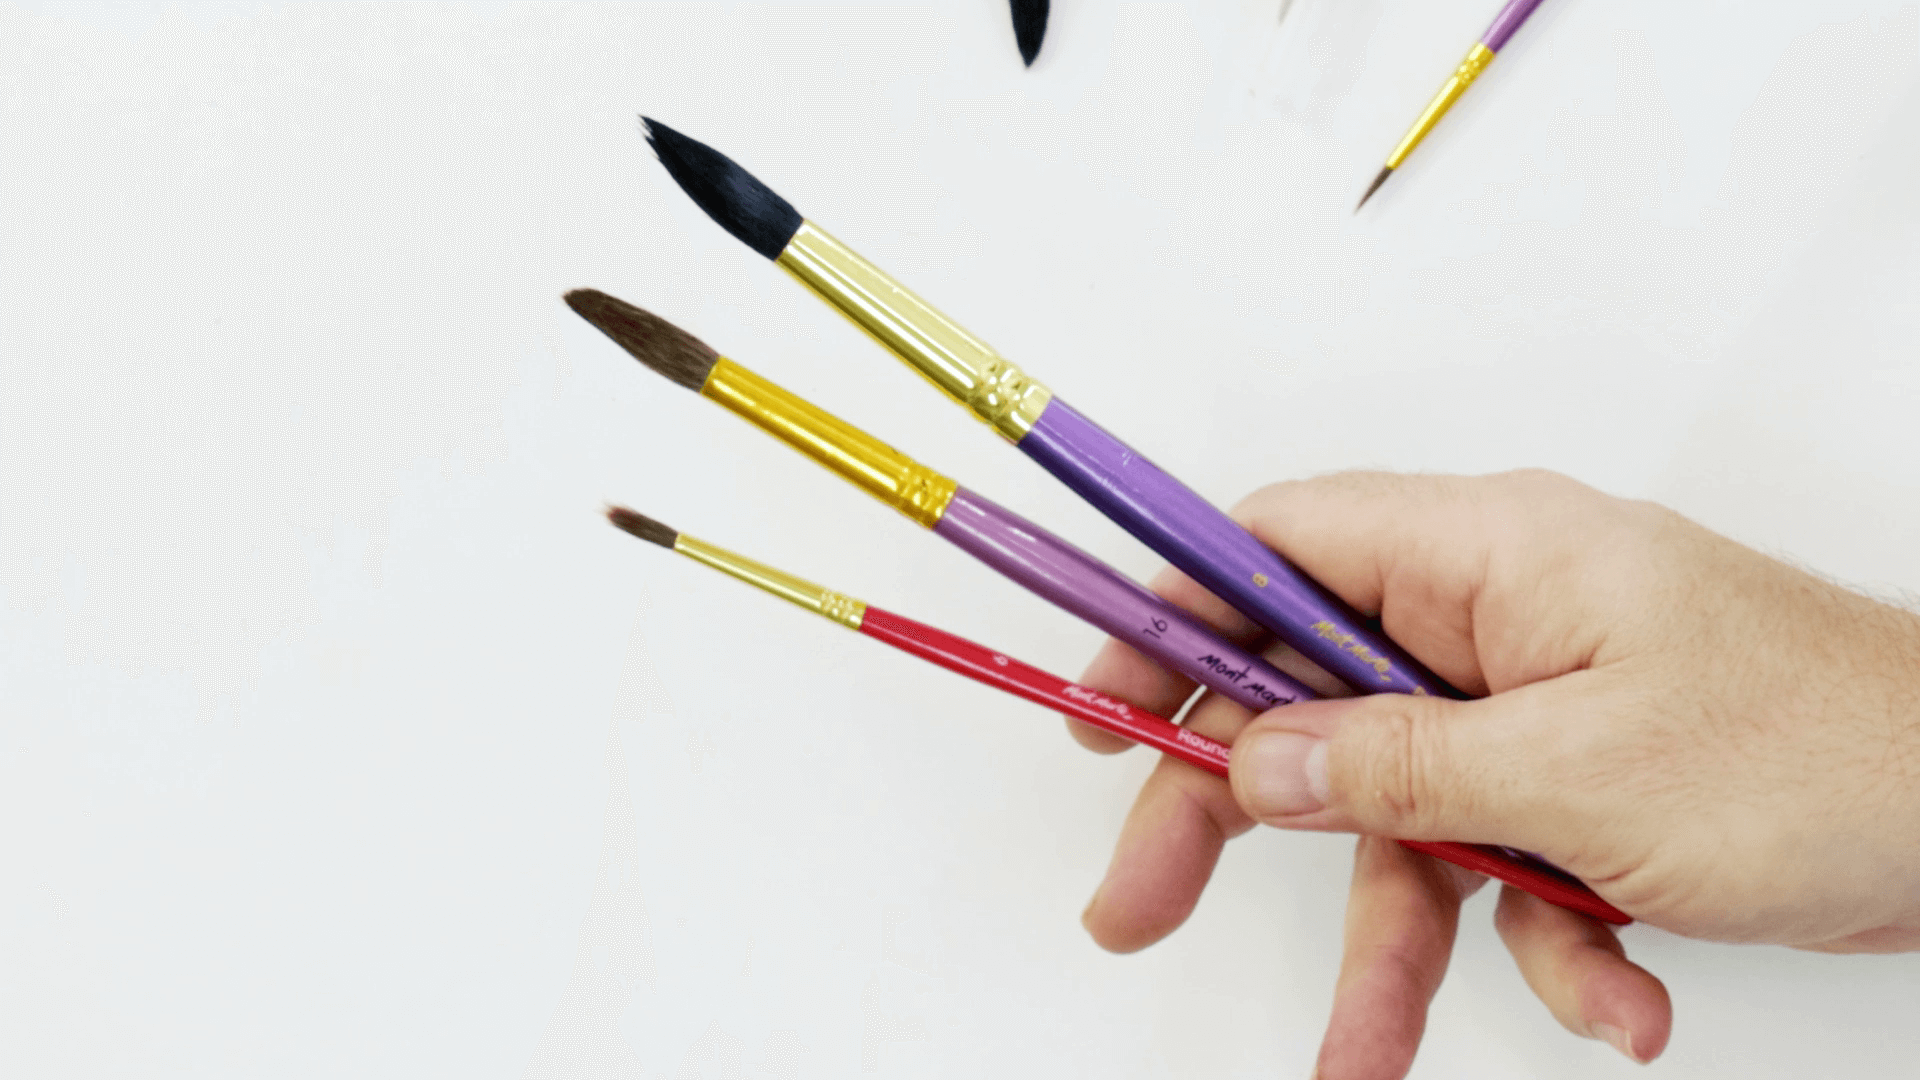 Hand holding three round watercolour brushes of different sizes.